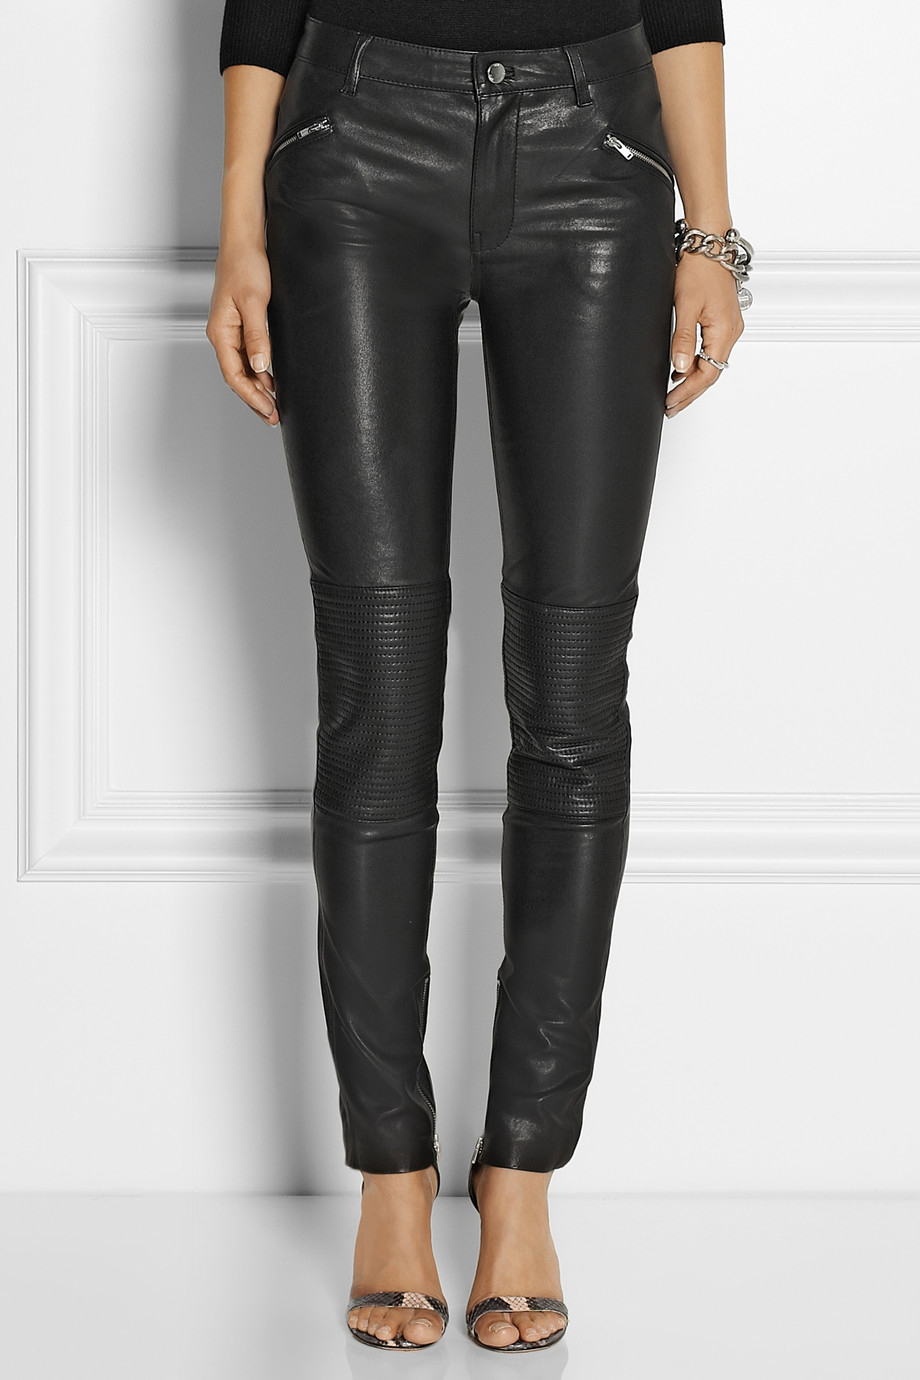 Lyst - Blk Dnm 1 Stretch-Leather Skinny Pants in Black